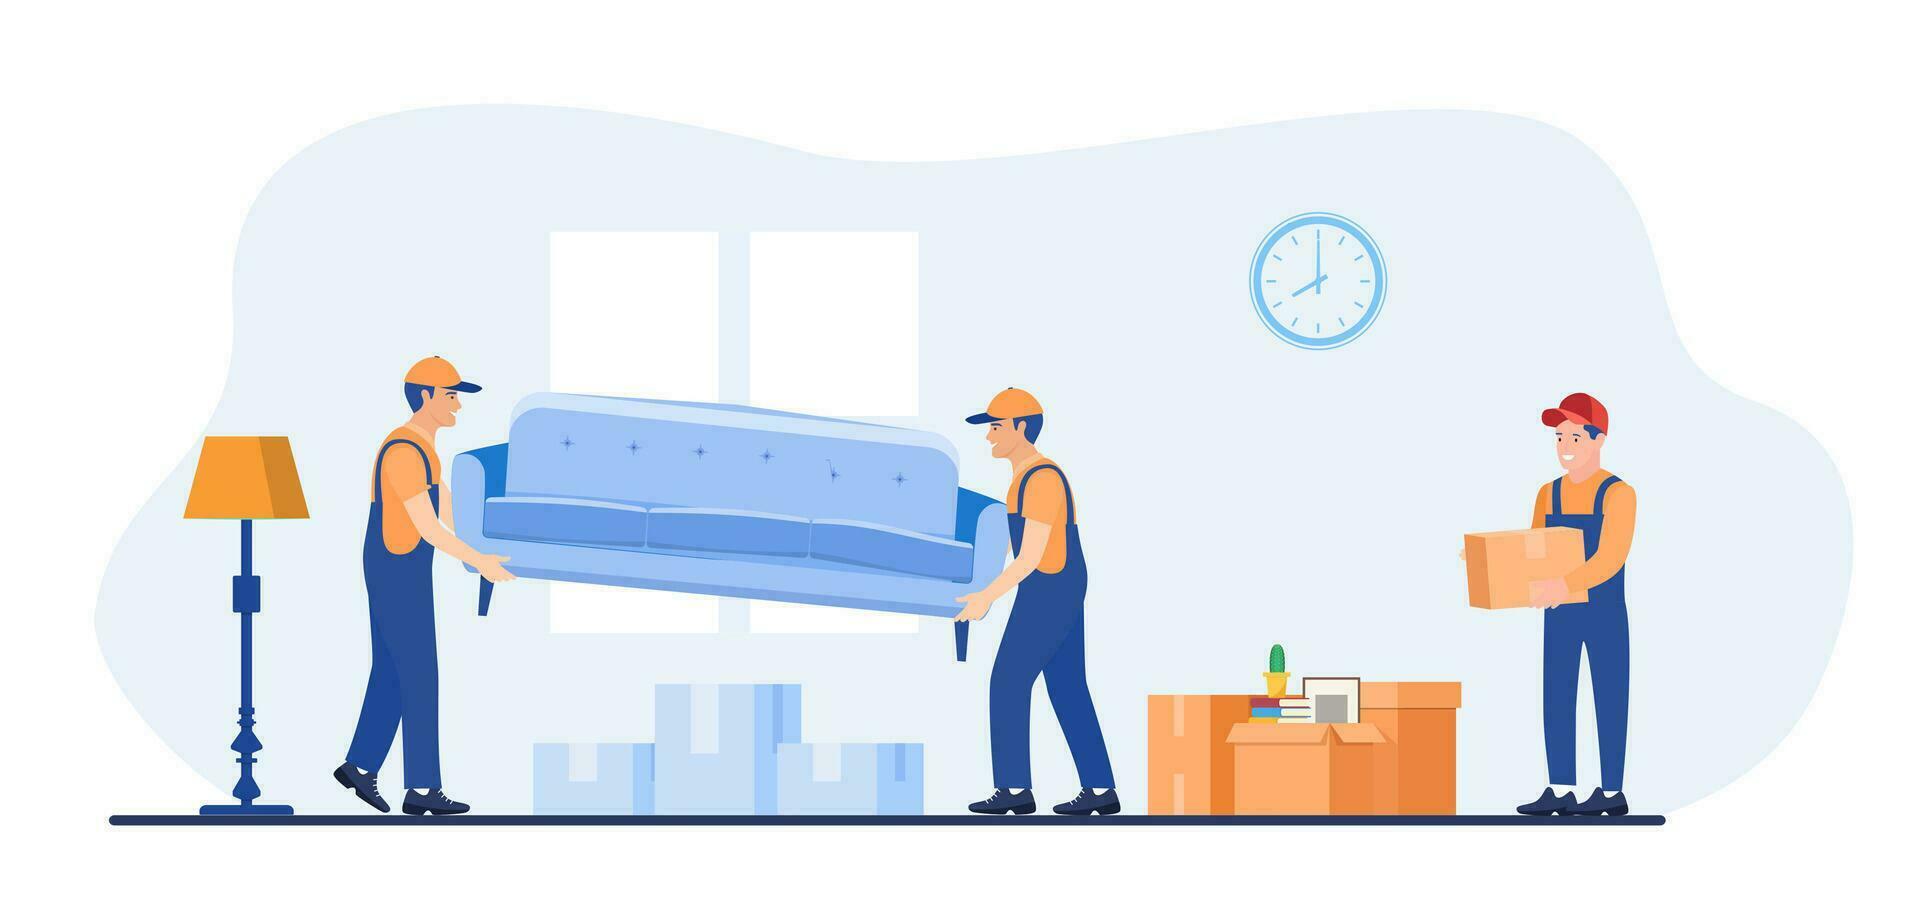 Concept moving house. Men in overalls taking boxes and furniture out of apartment. Moving with boxes to new home. Pile of stacked cardboard boxes. Vector illustration in flat style